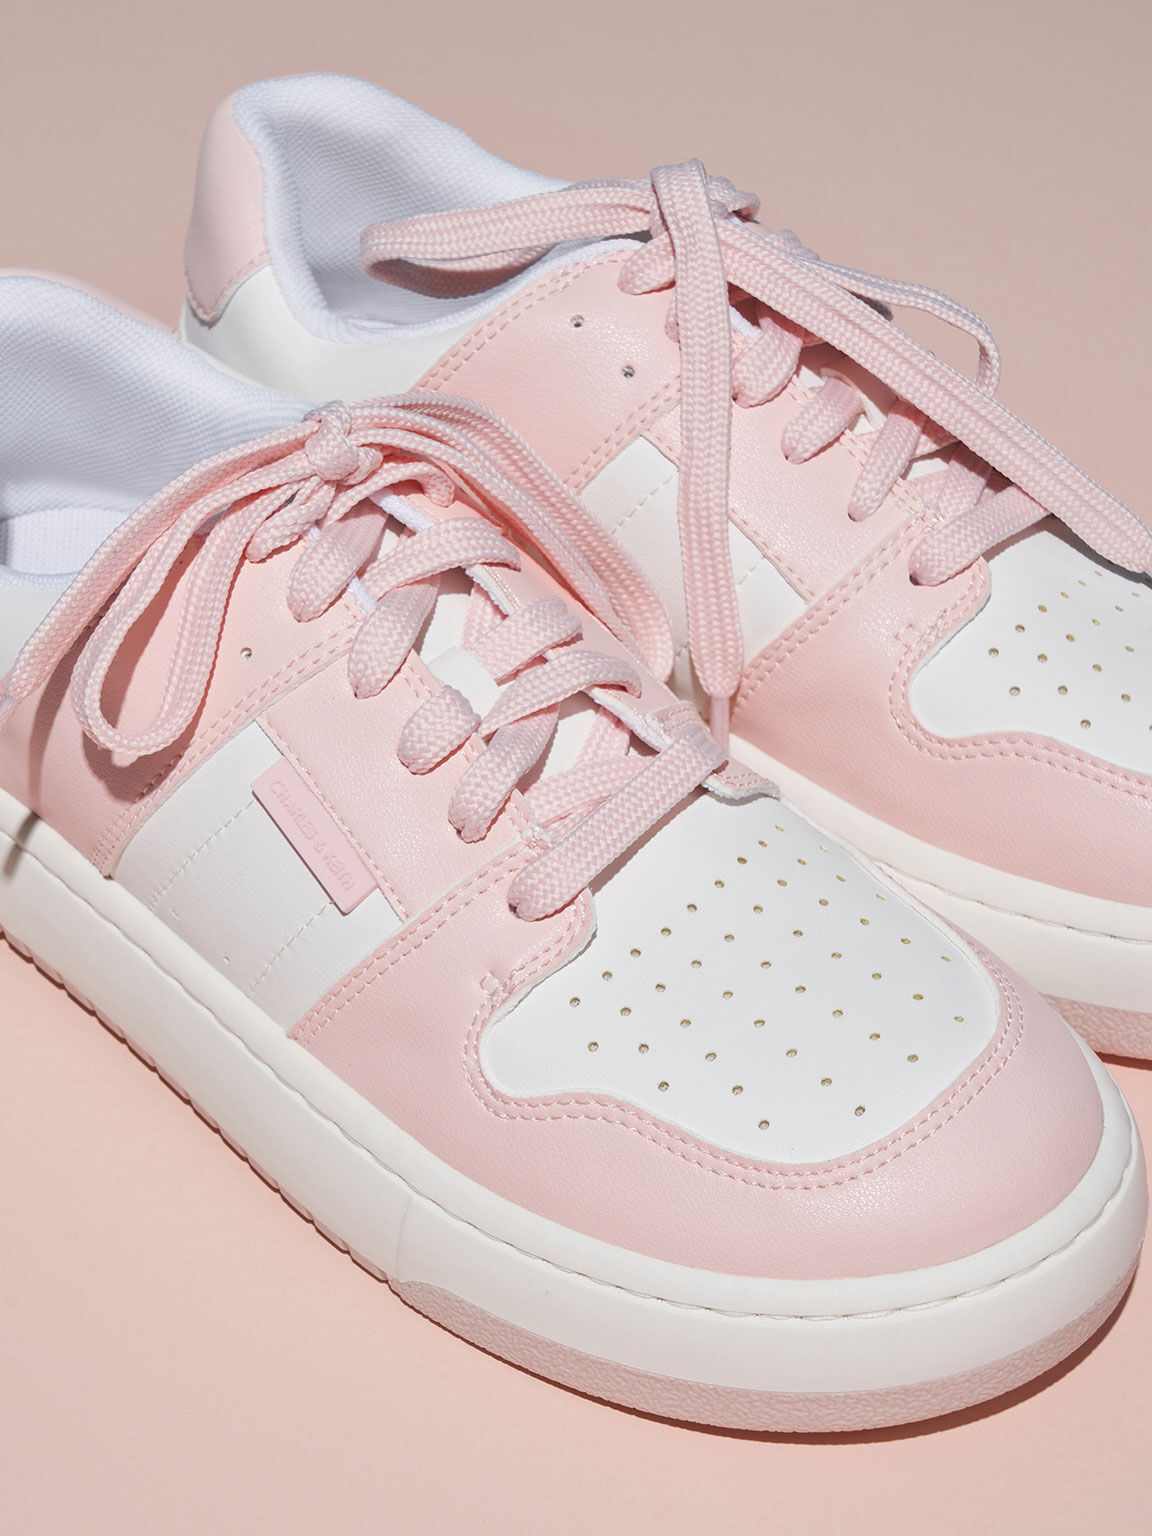 Two-Tone Low-Top Sneakers, Pink, hi-res